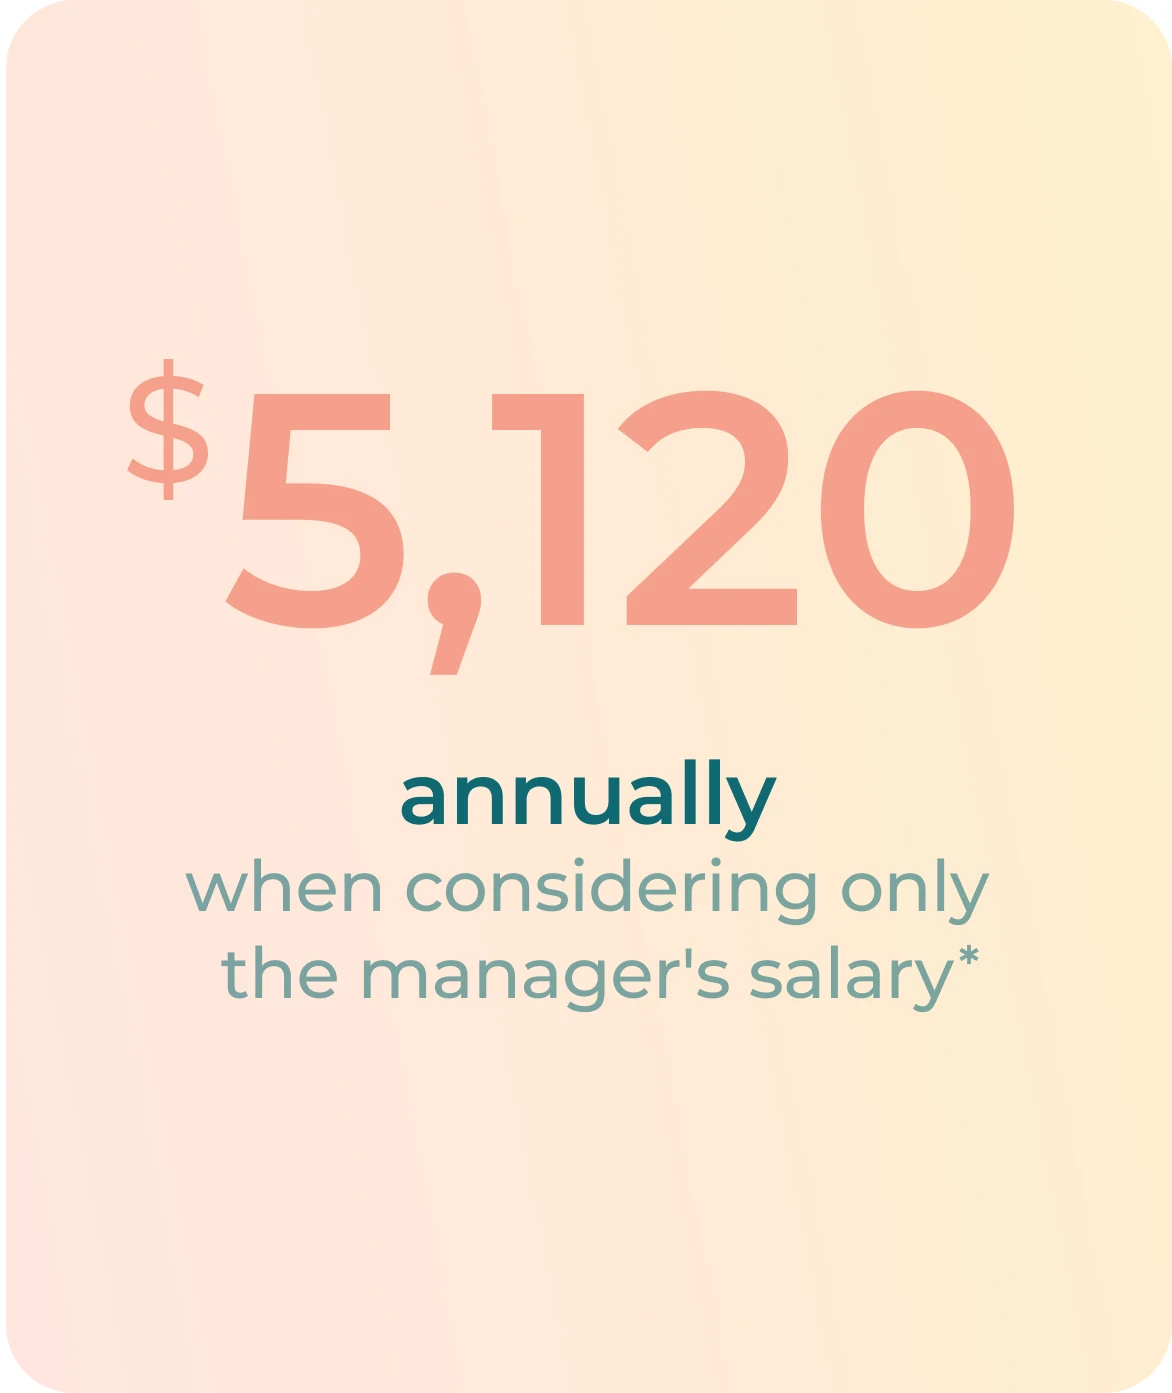 $5,120 annually when considering only the manager salary